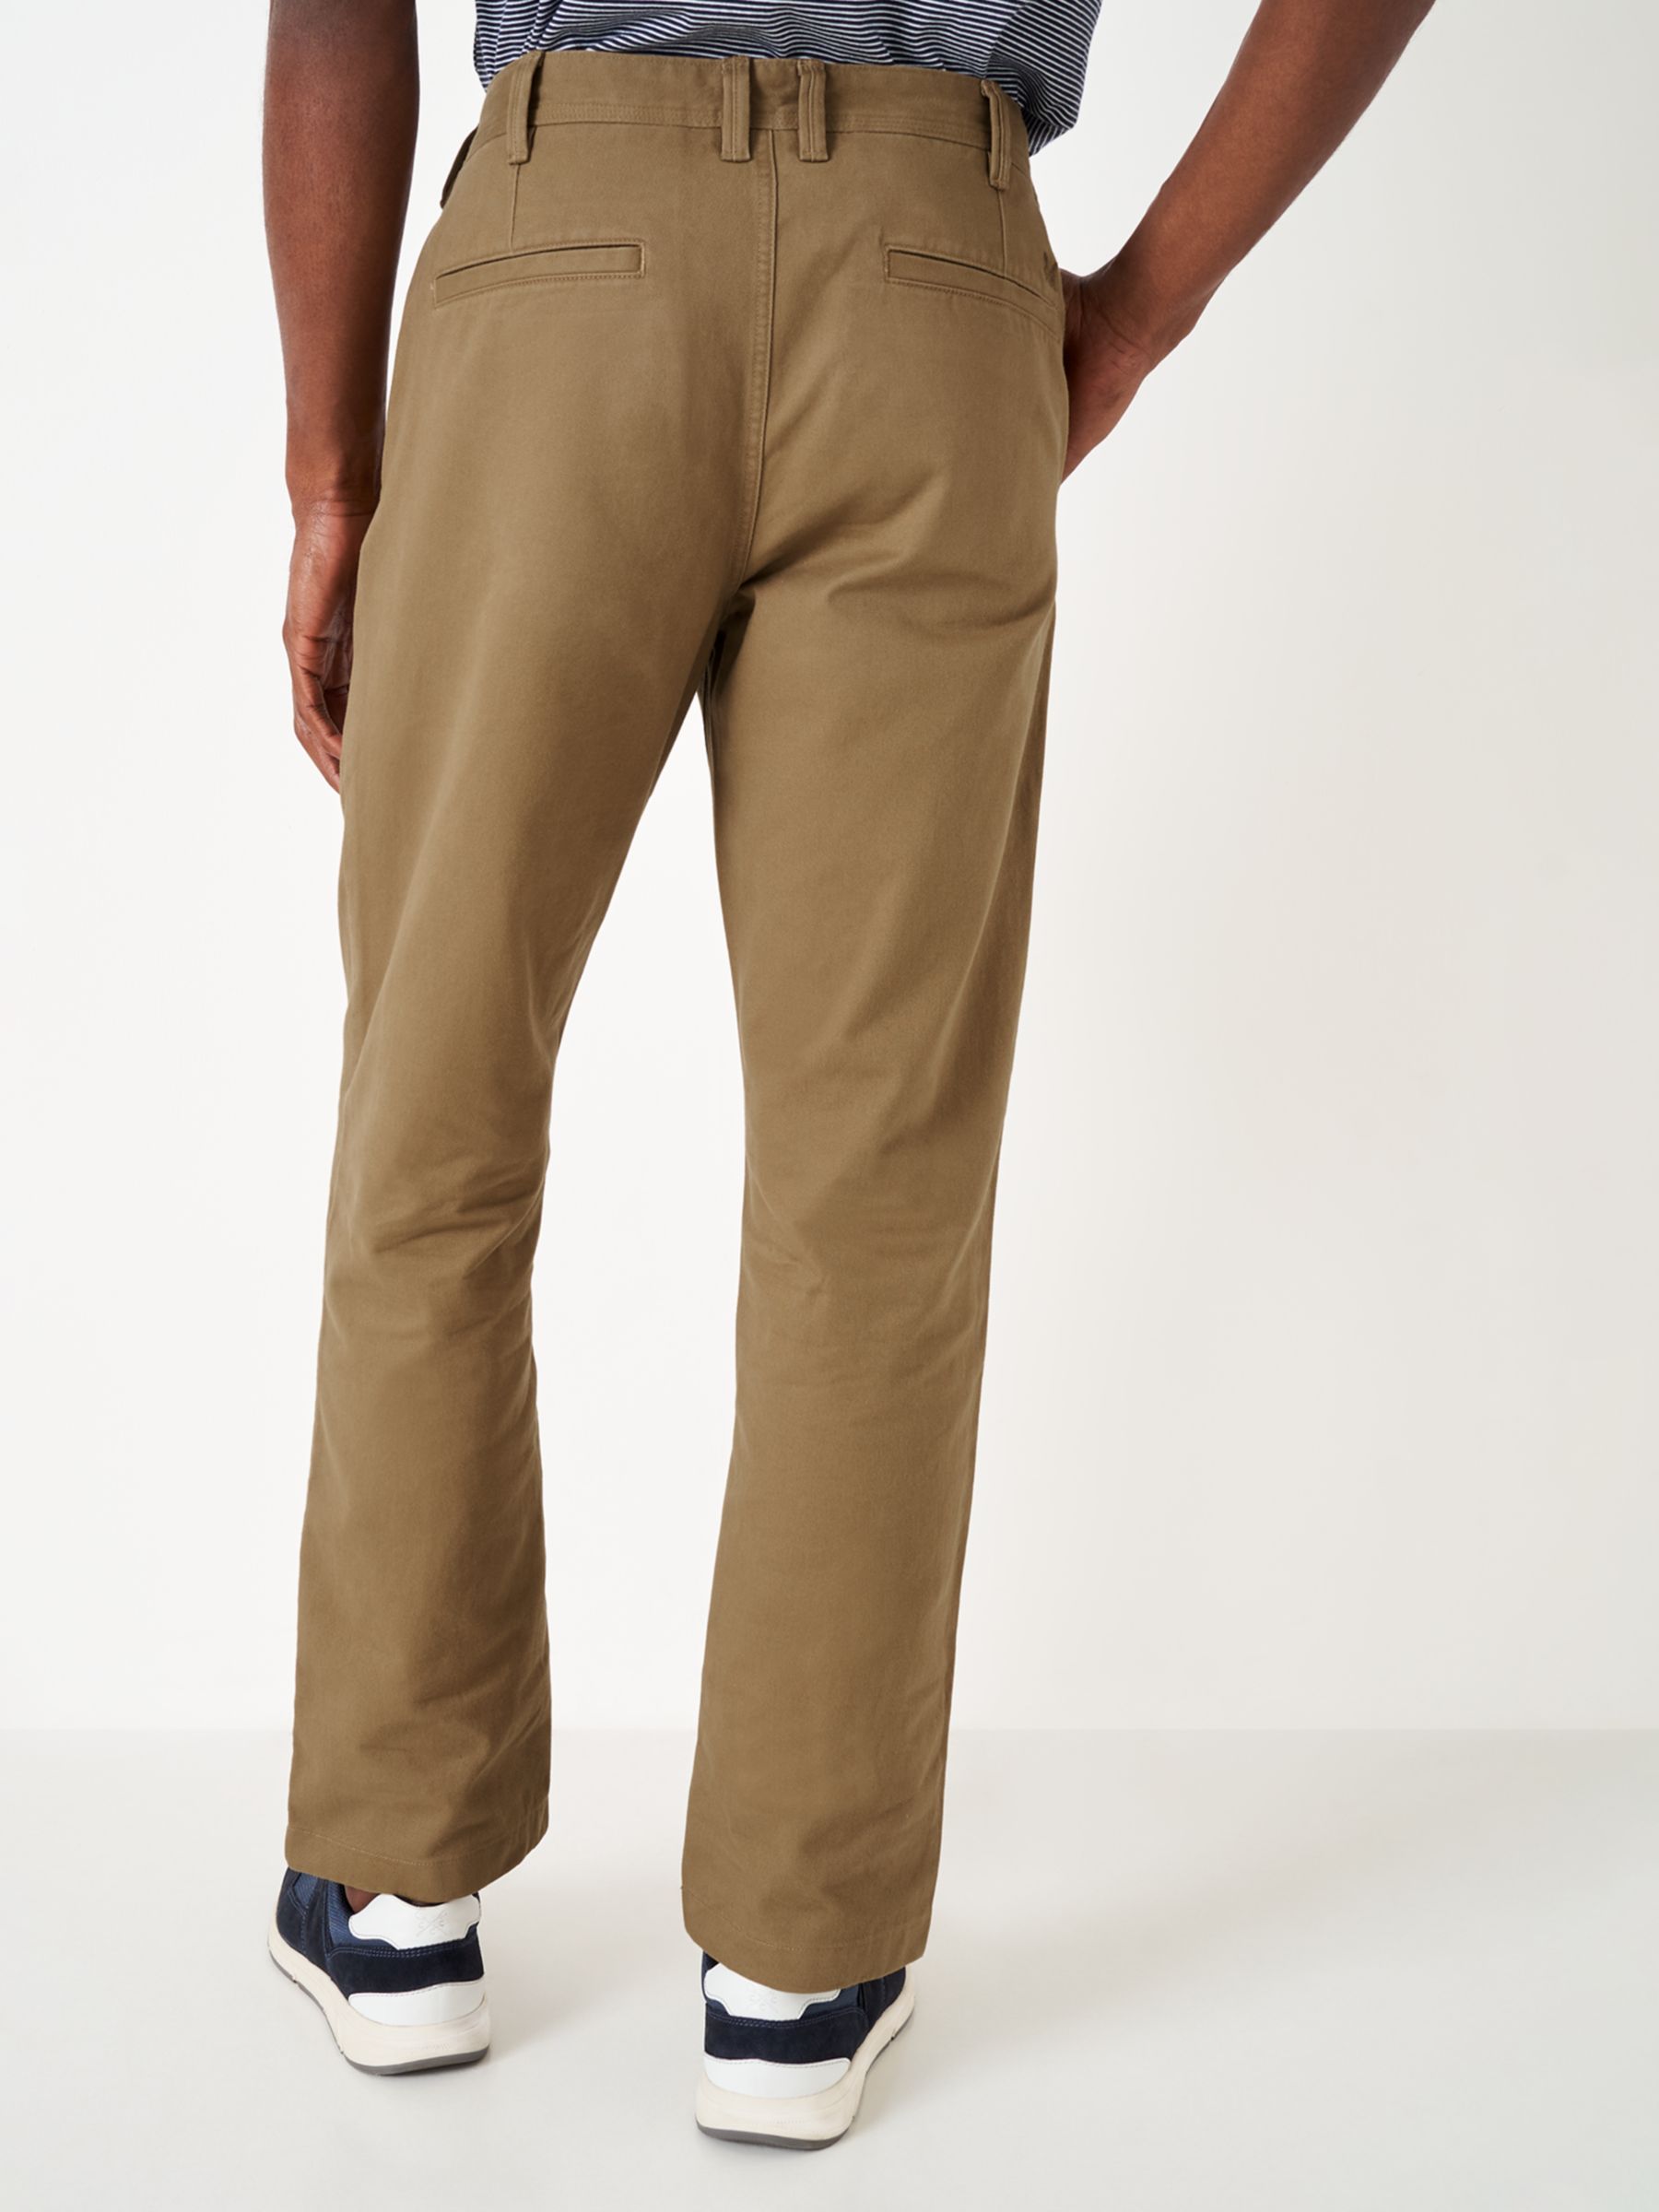 Buy Crew Clothing Cotton Vint Chinos Online at johnlewis.com